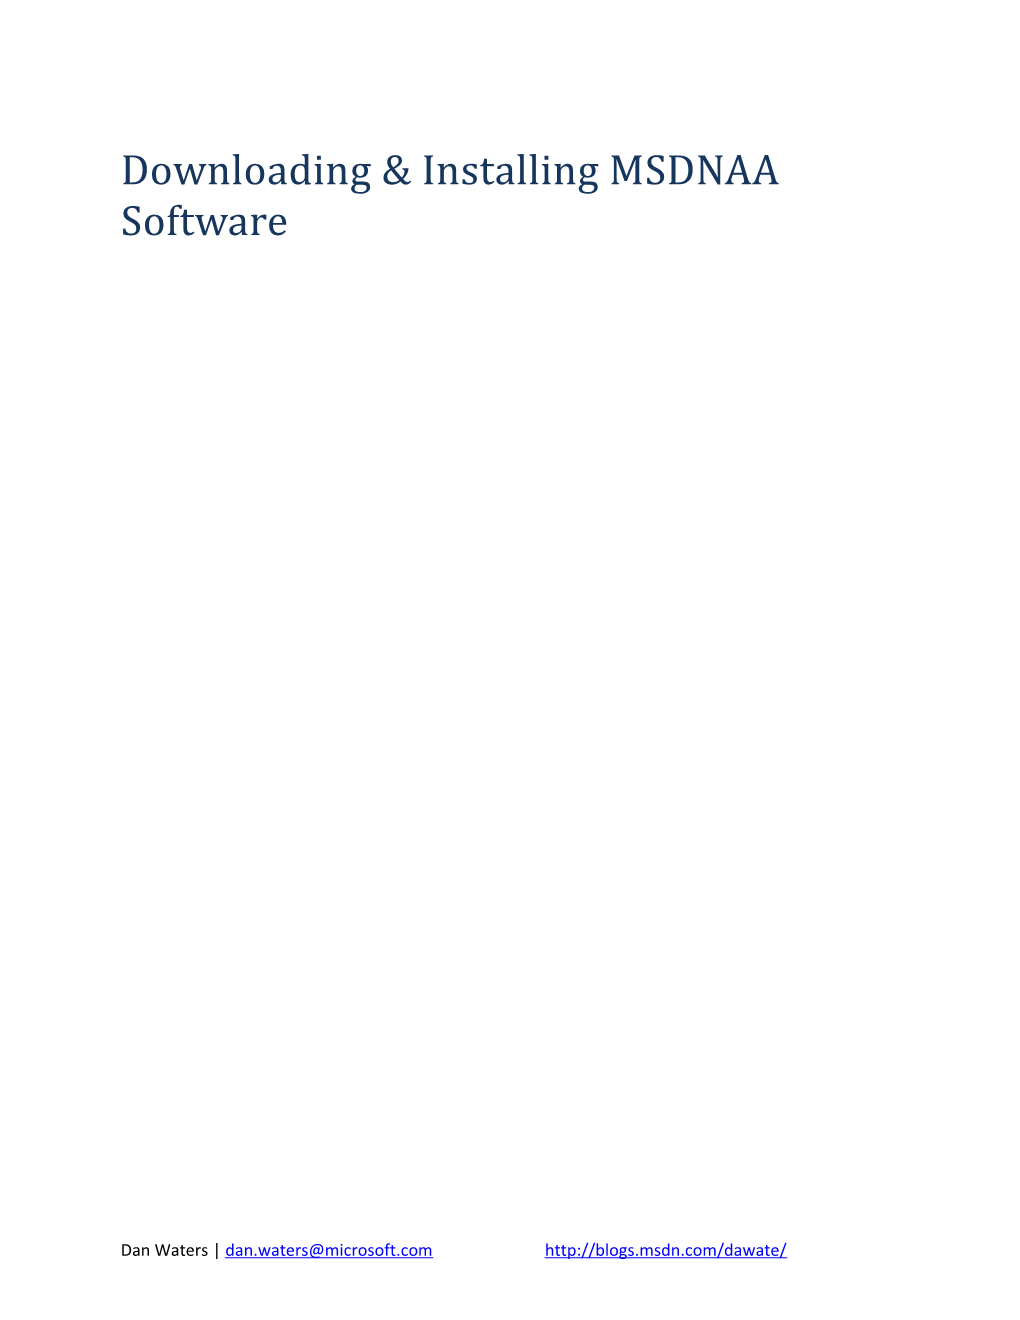 Downloading & Installing MSDNAA Software